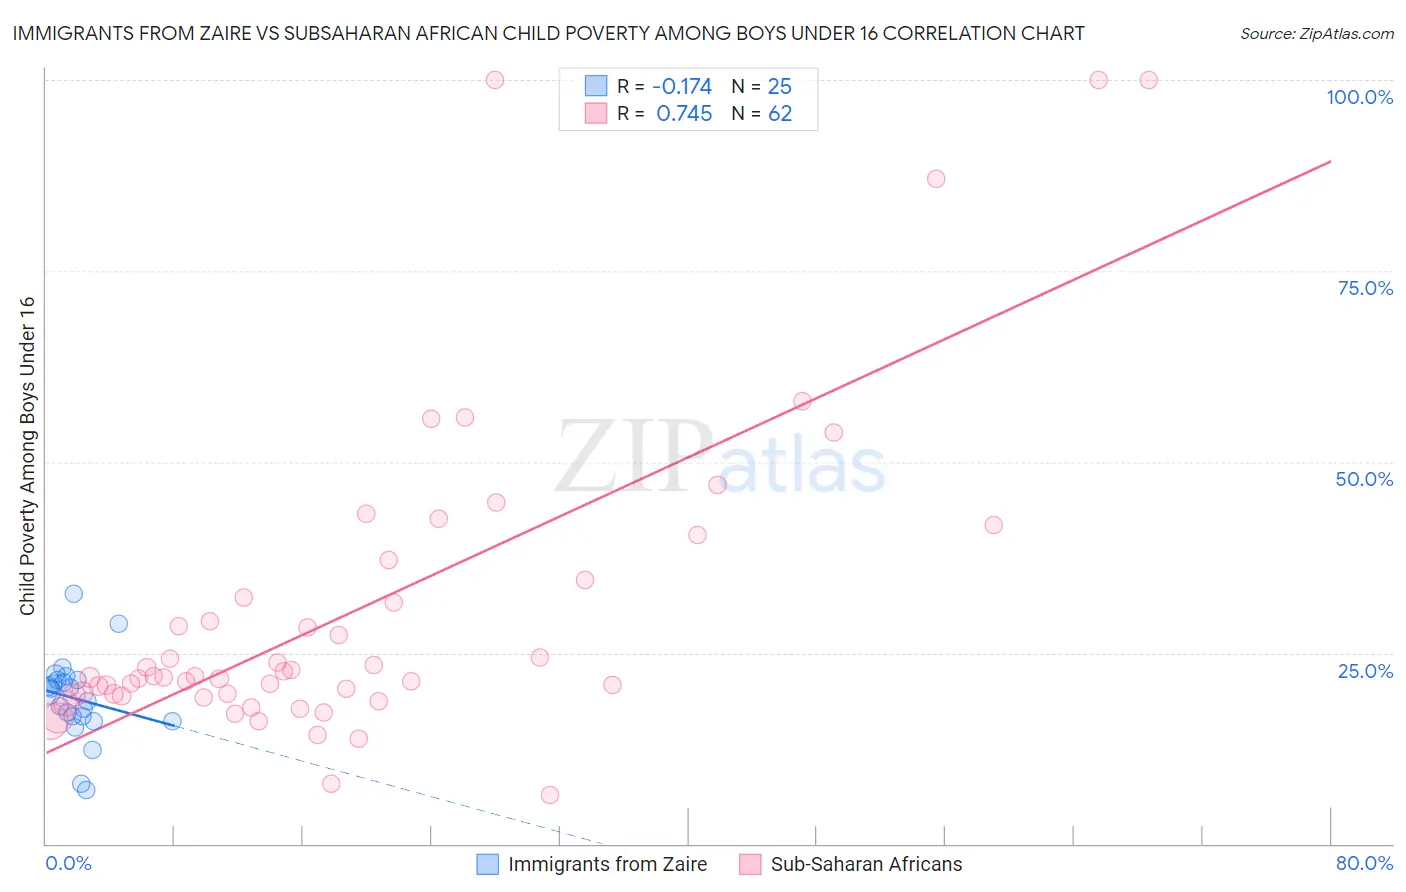 Immigrants from Zaire vs Subsaharan African Child Poverty Among Boys Under 16